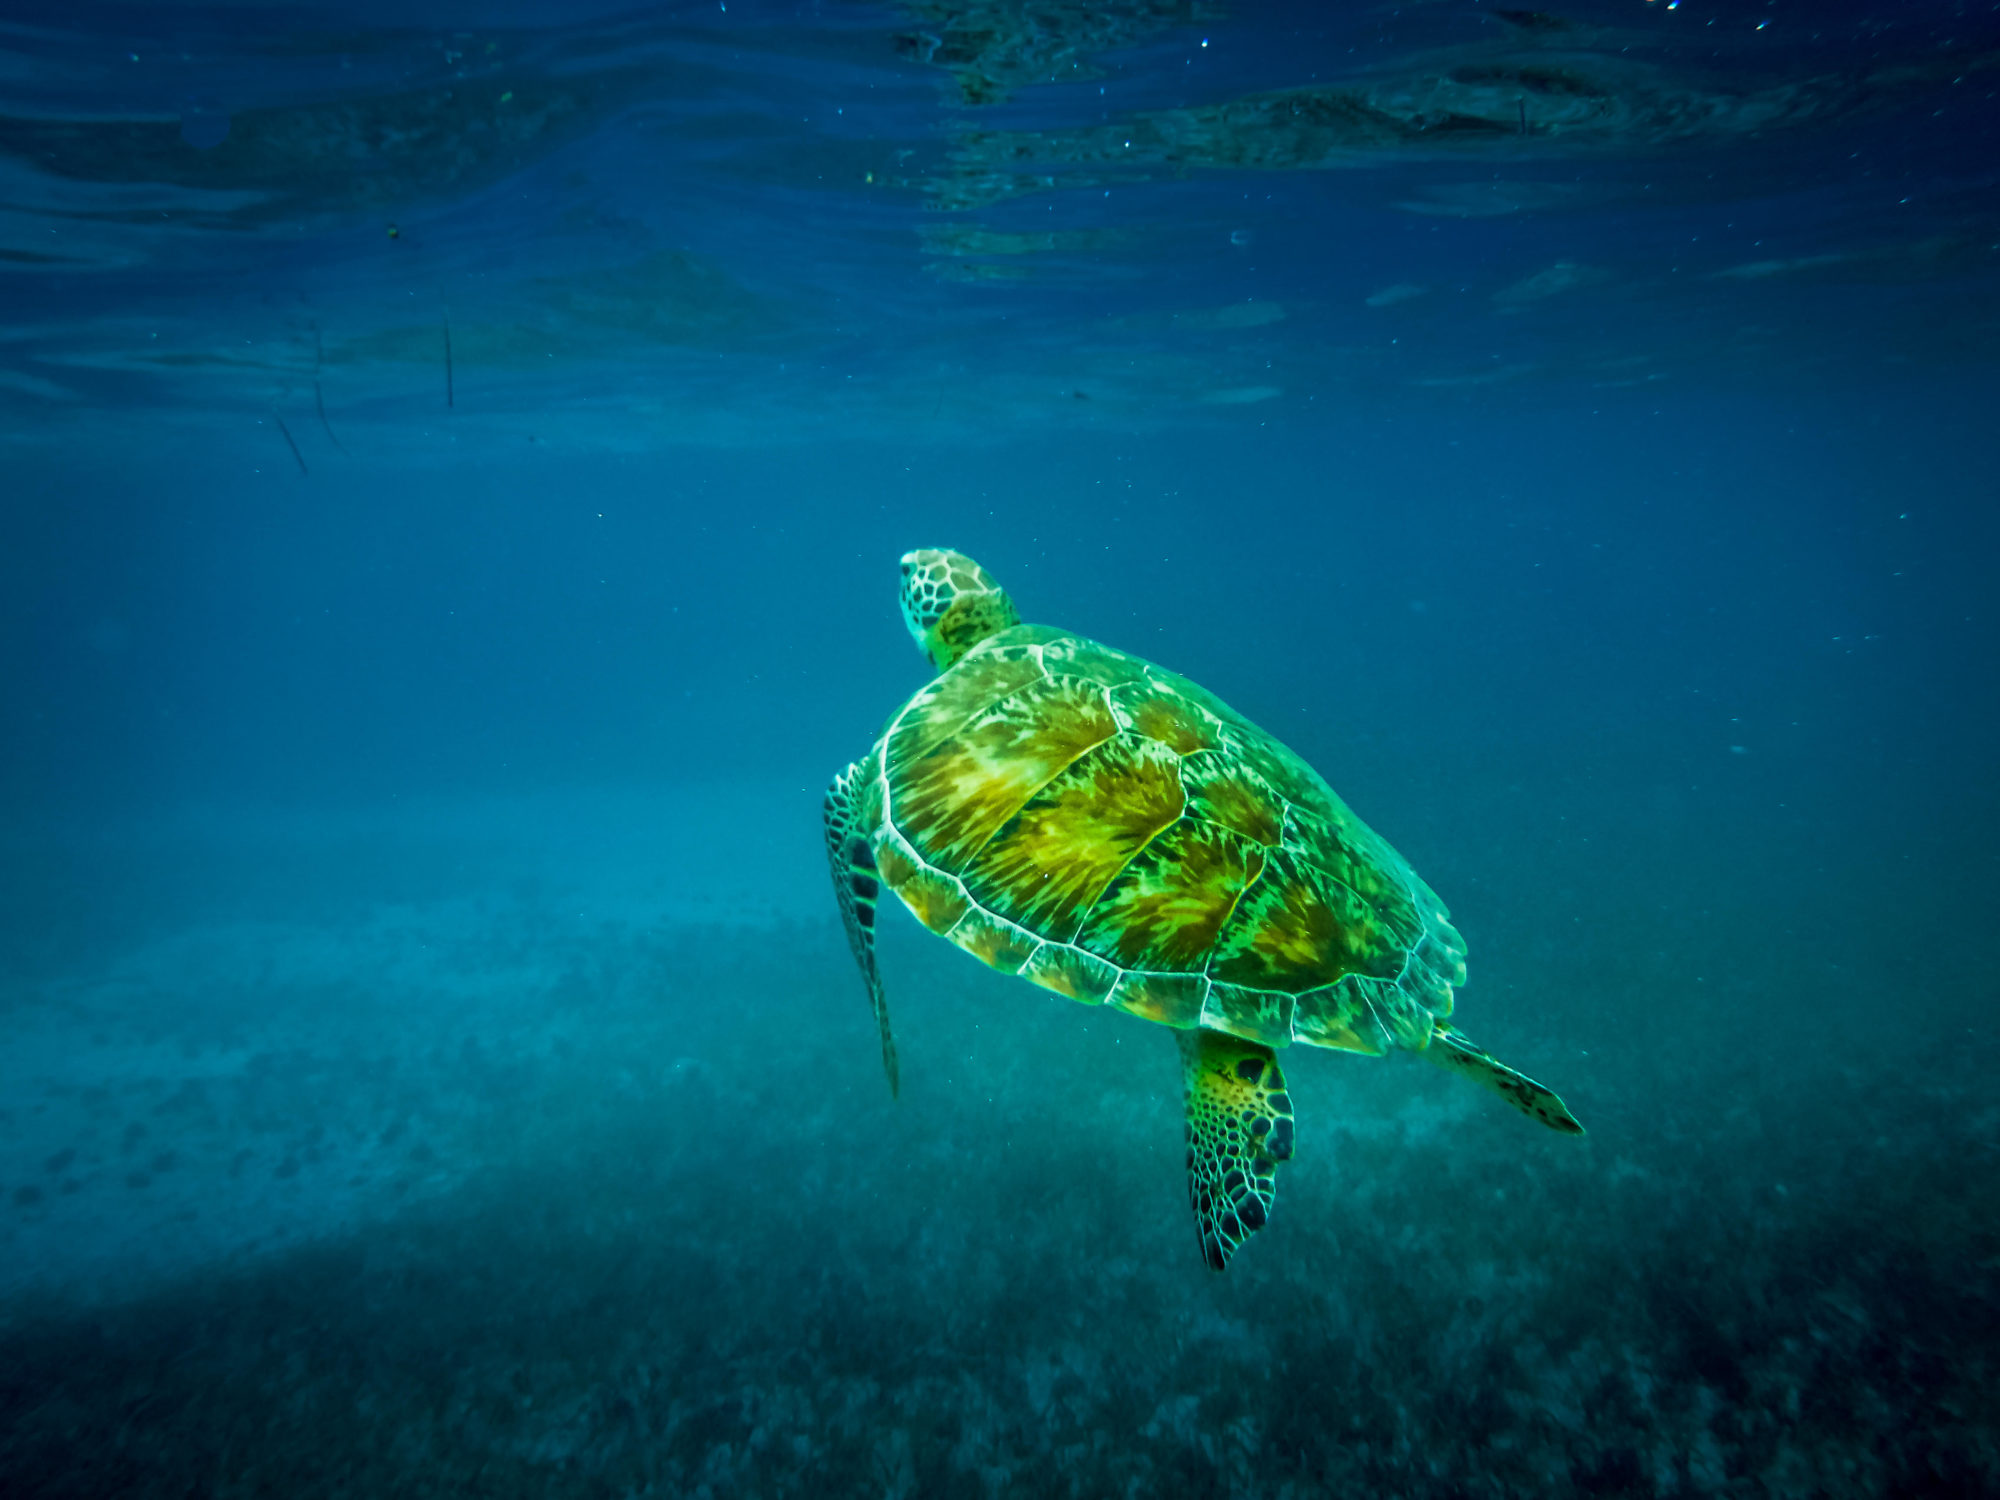 Loggerhead turtles are found in the waters of Abrolhos National Park (Image: Alamy)